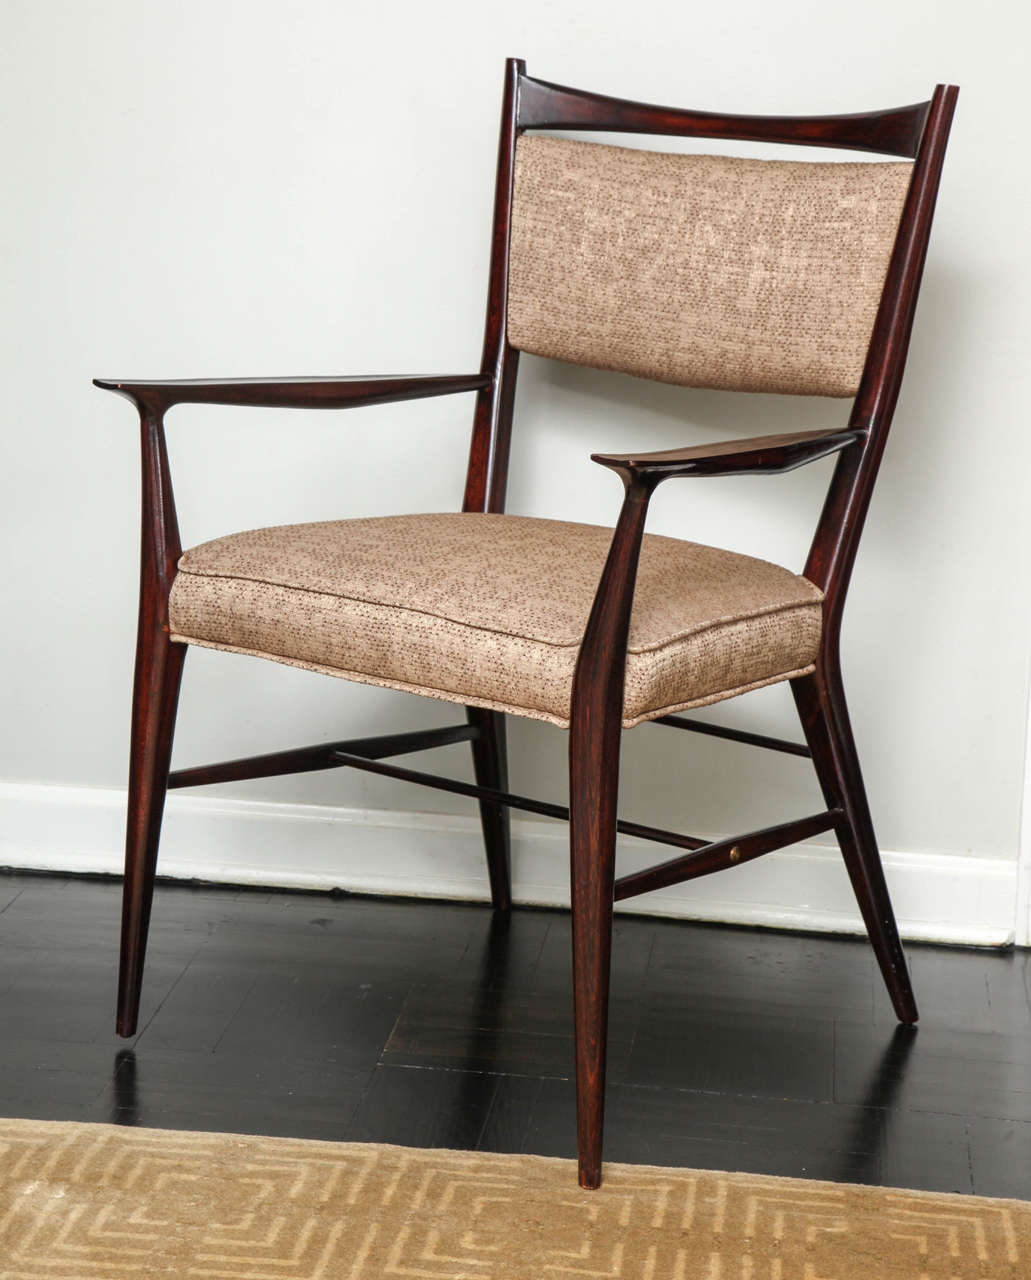 Mid-20th Century Paul McCobb Mahogany and Brass Dining Chairs